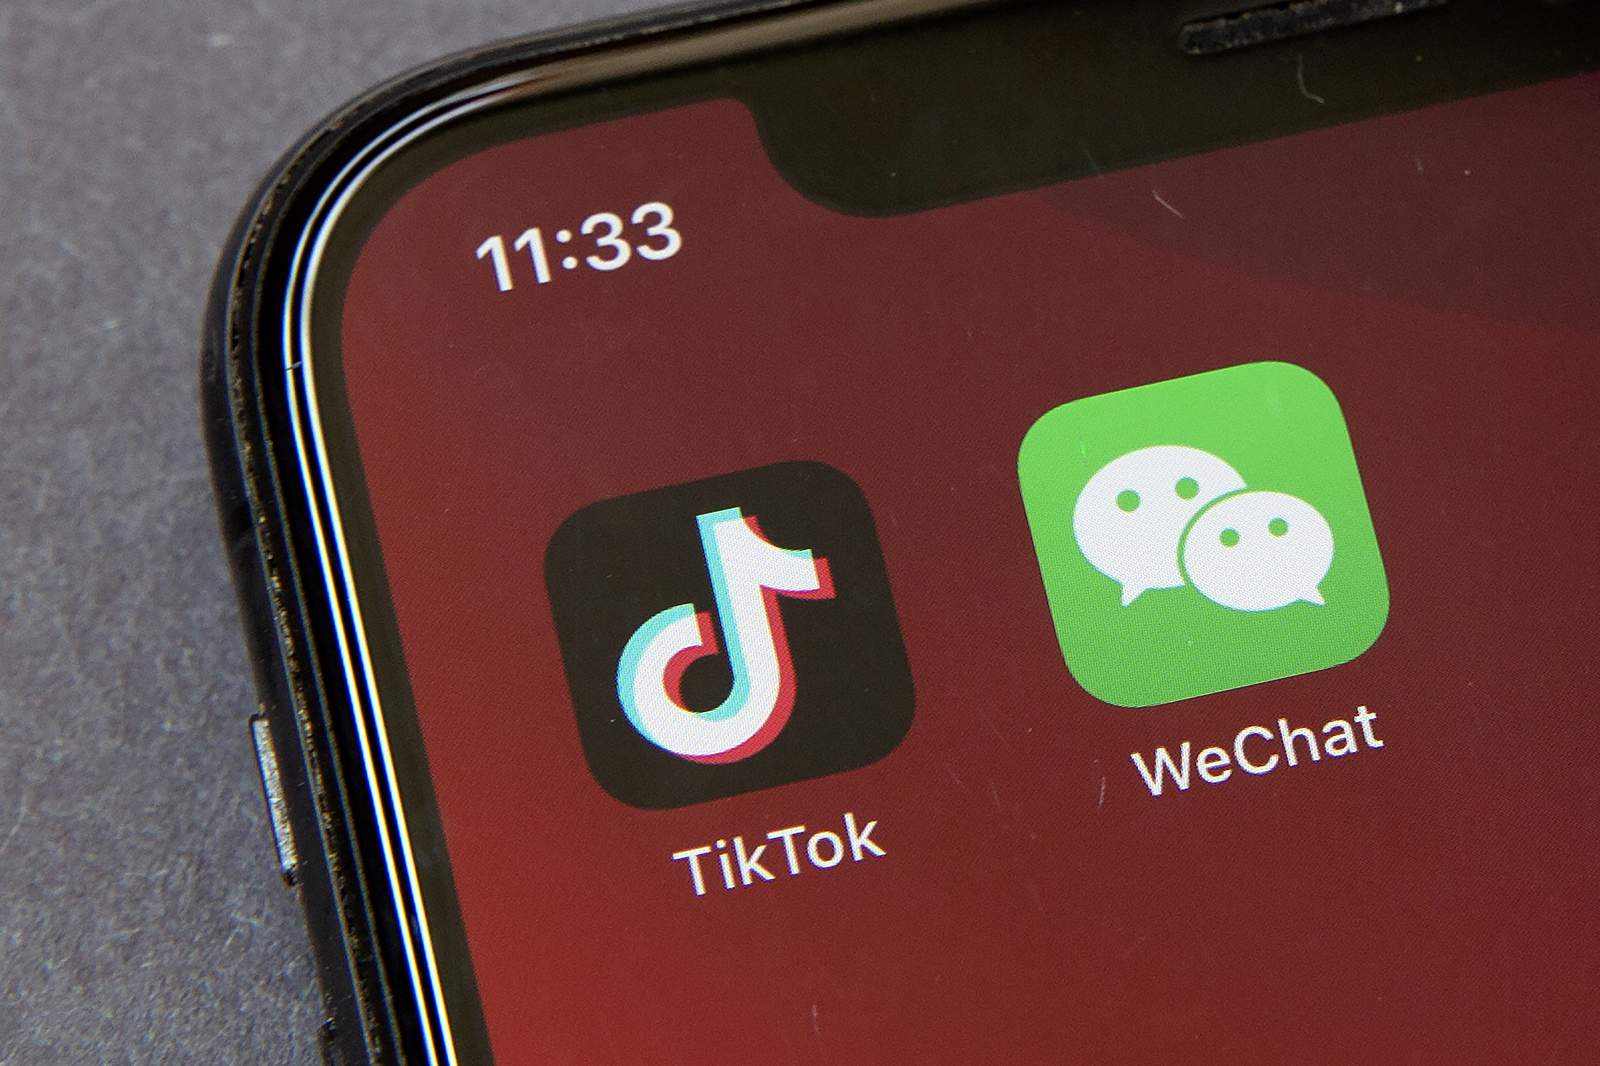 US banning use of TikTok, WeChat for national security